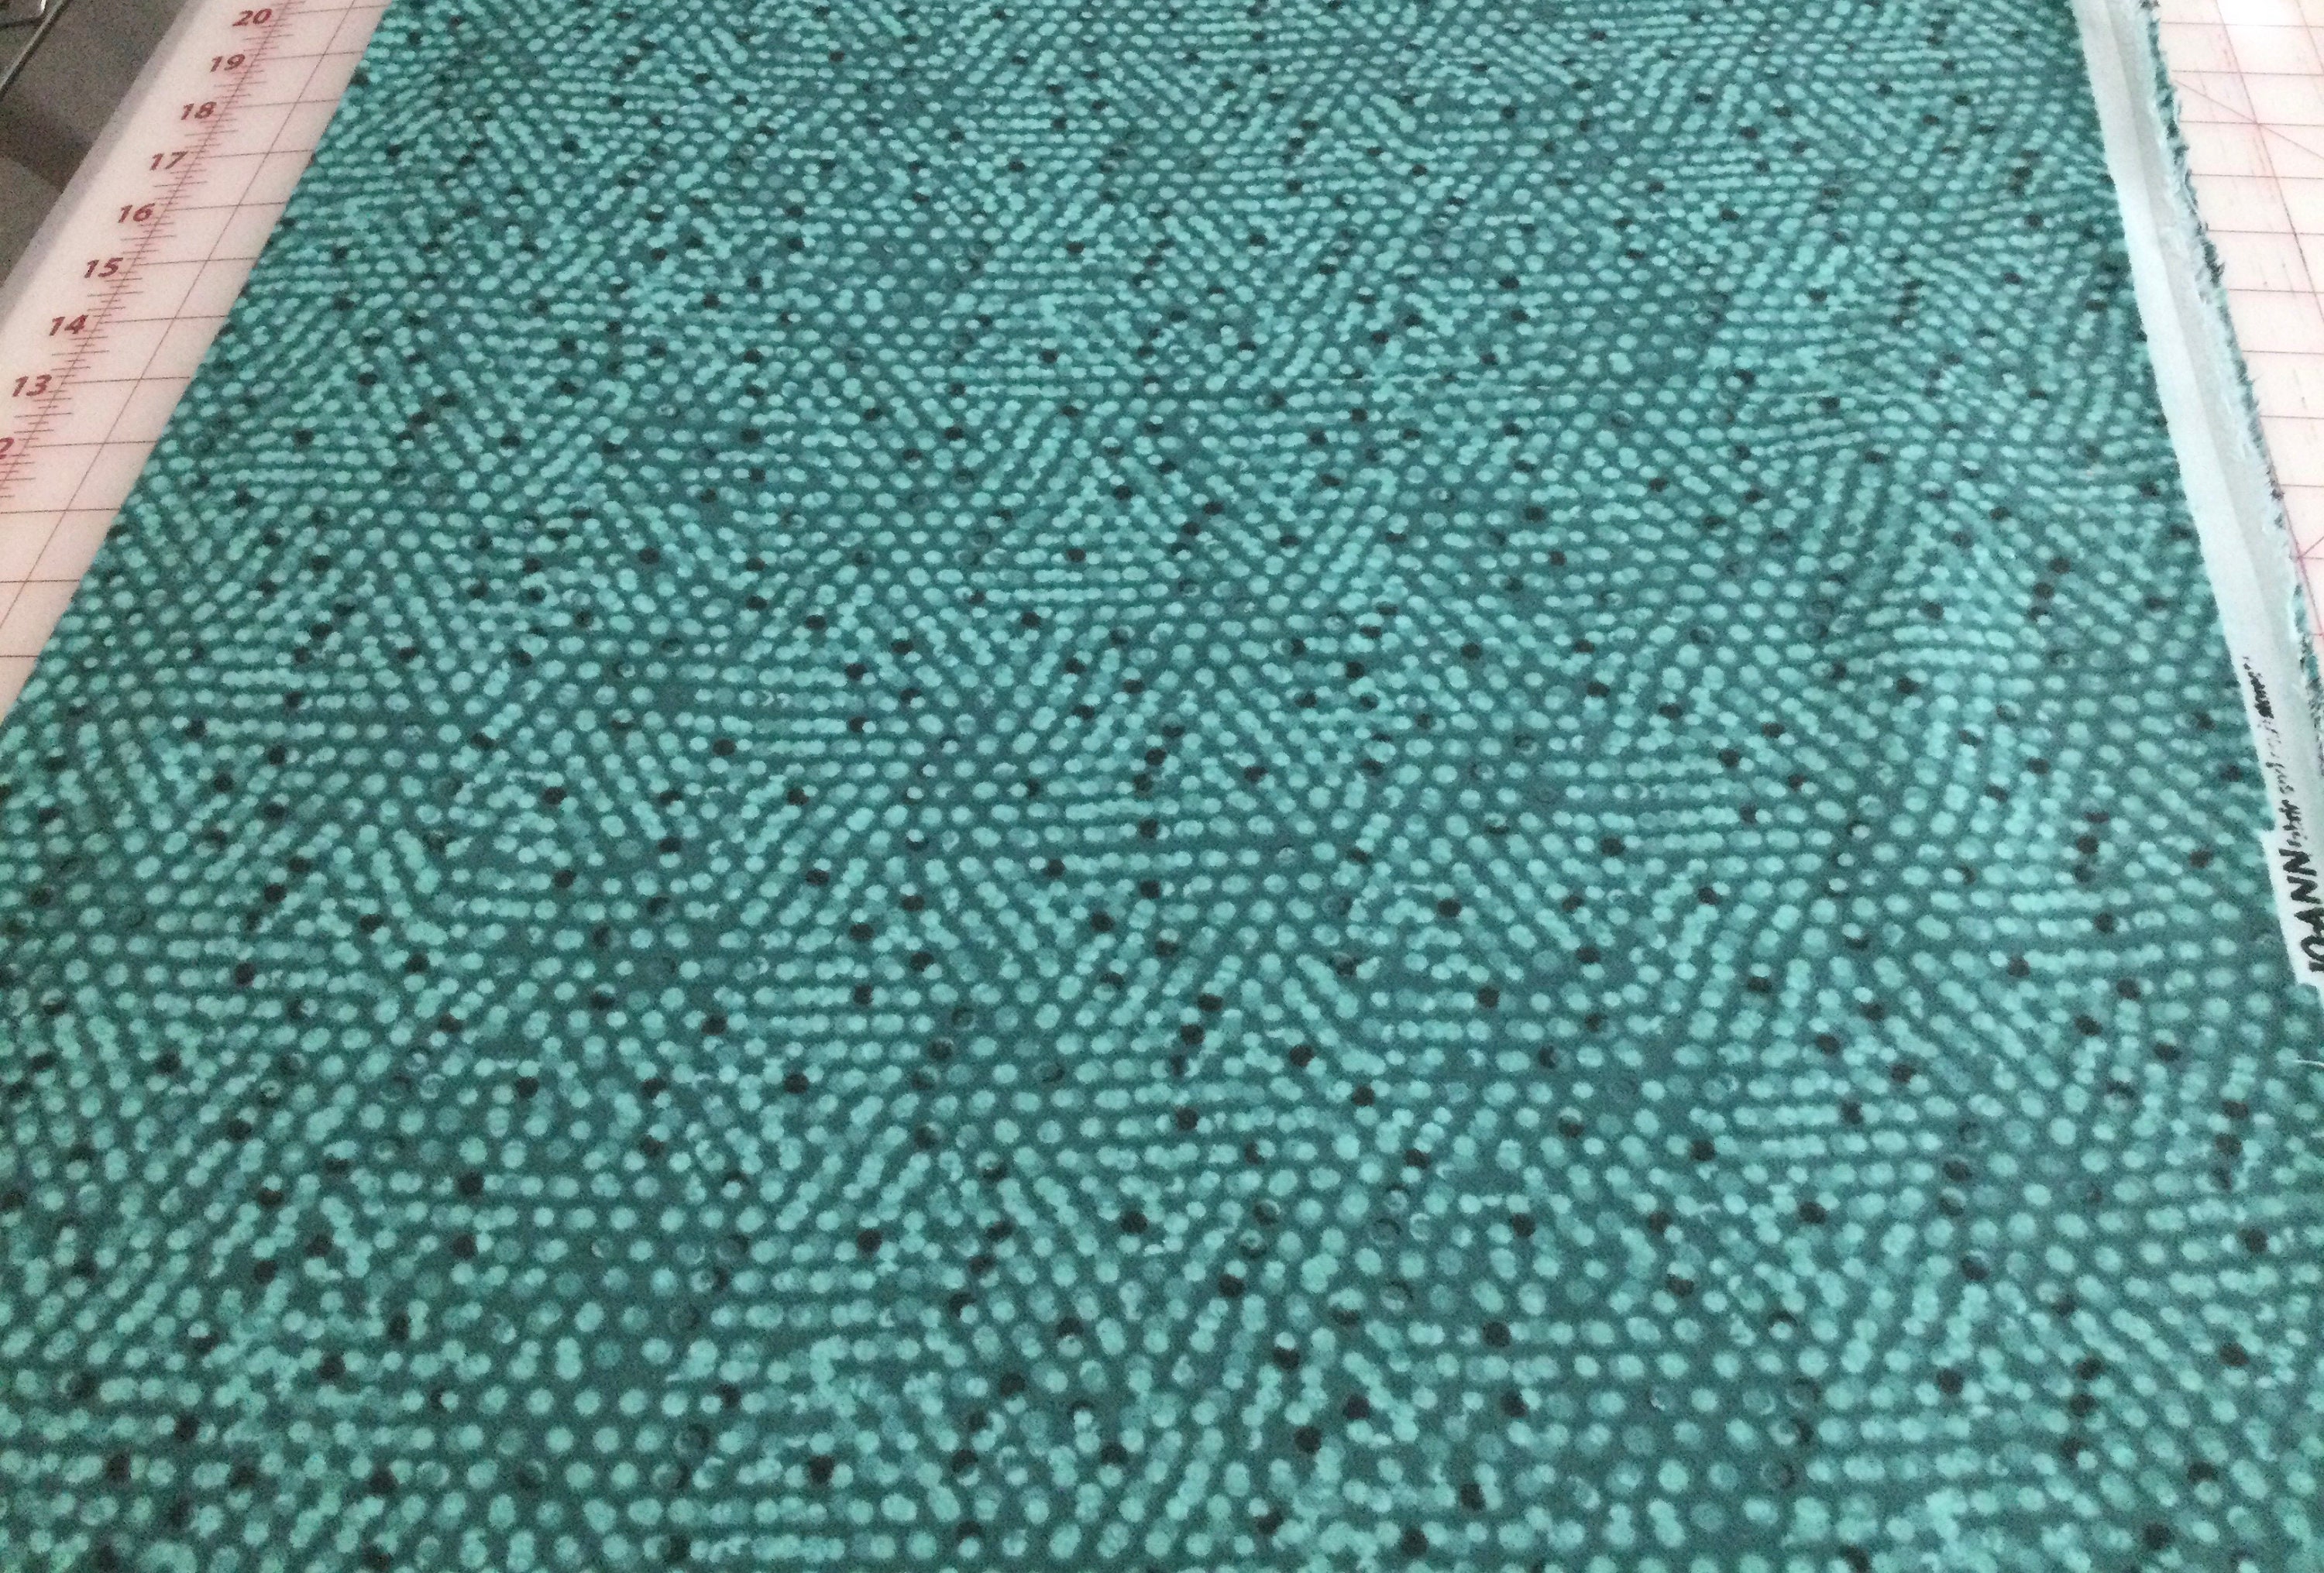 Flannel/Teal Green Tonal Dots Blender Cotton Fabric By The Yard